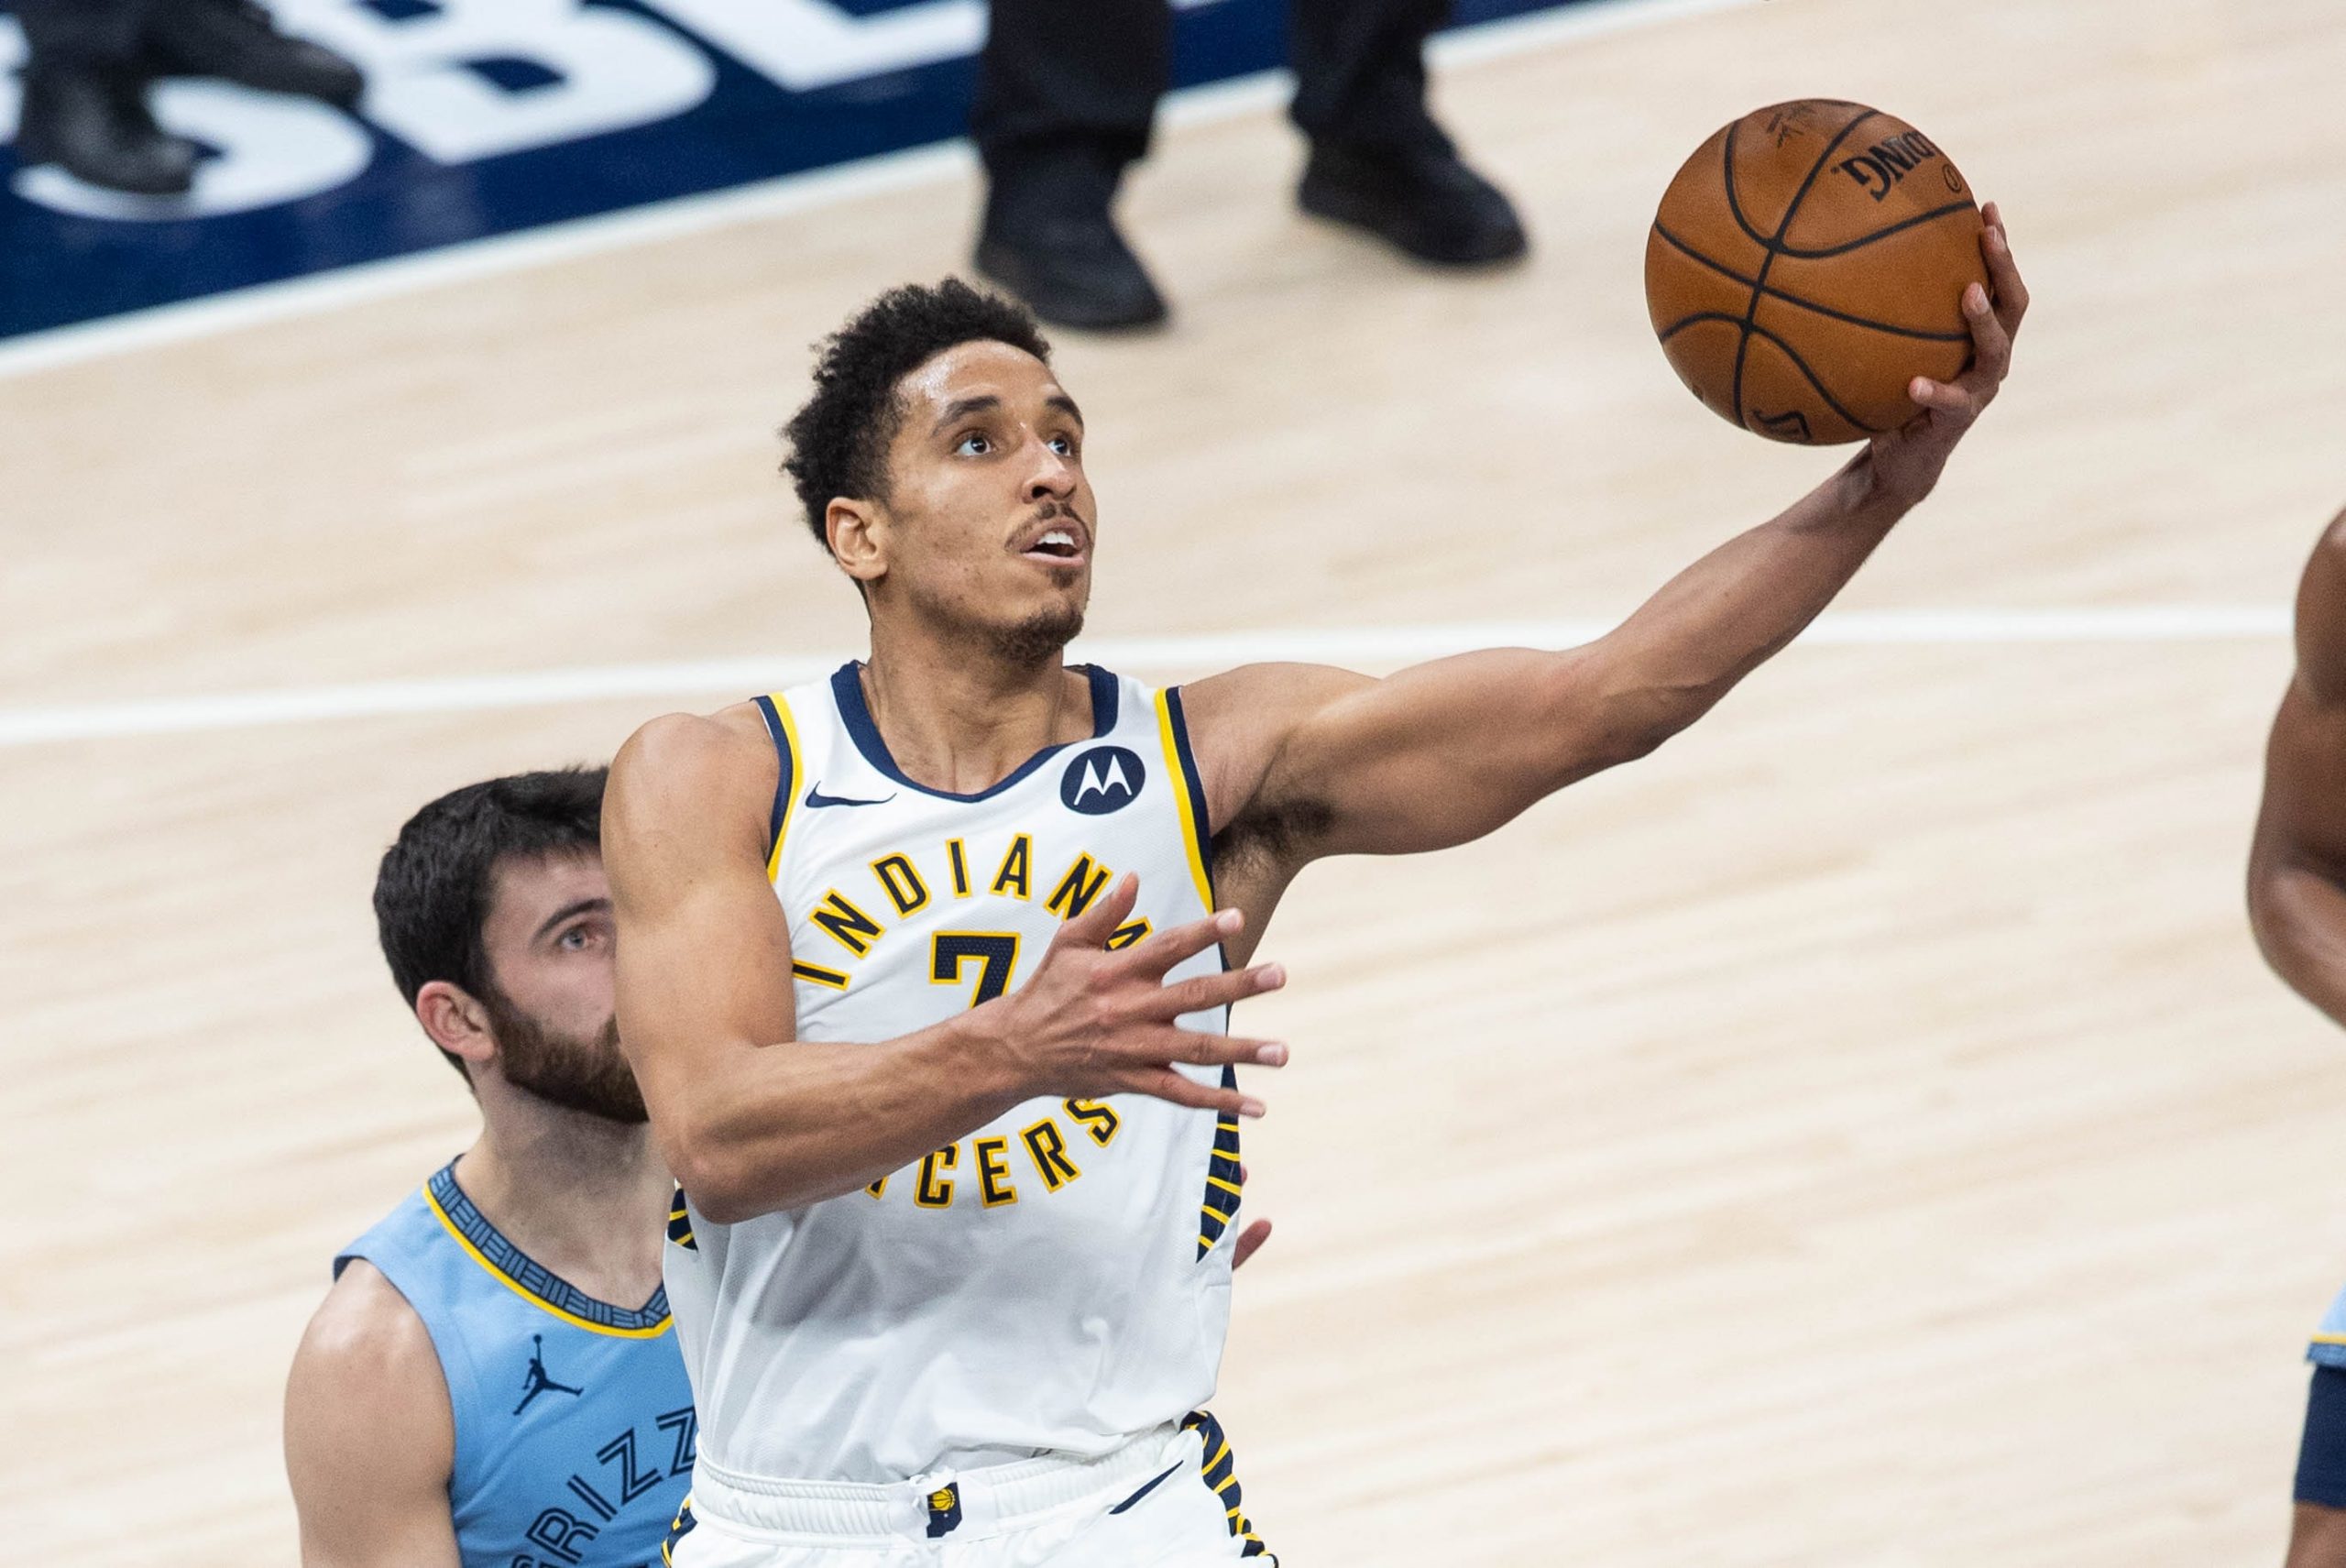 Malcolm Brogdon of the Indiana Pacers